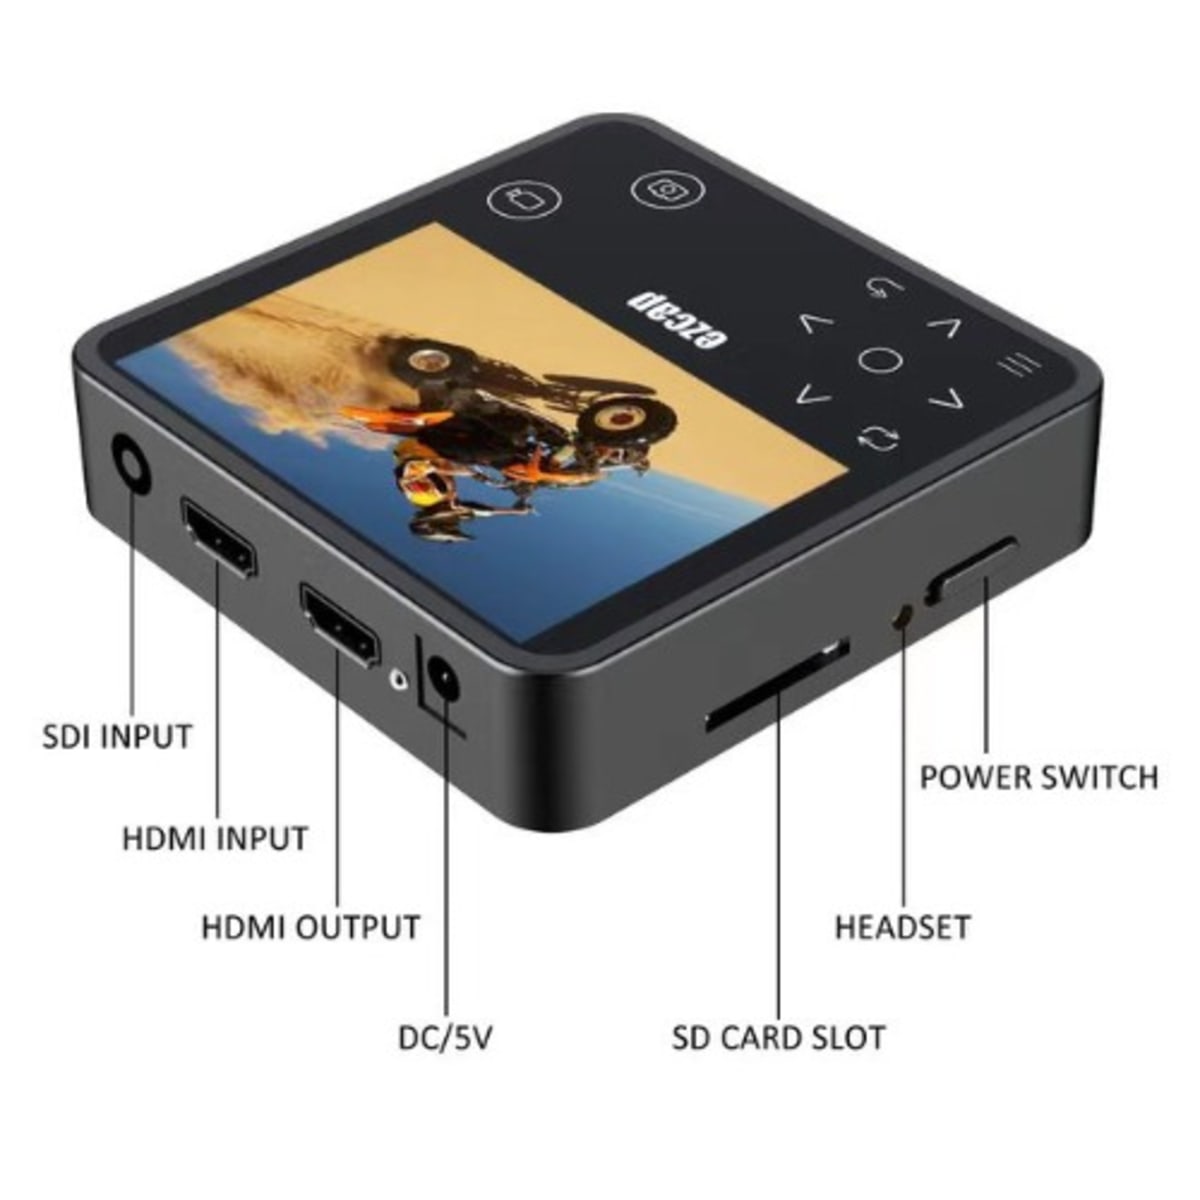 Put together Hornet Predictor Ezcap275 Hdmi - Sdi Fhd Live Video 1080p Recorder With Card | Konga Online  Shopping